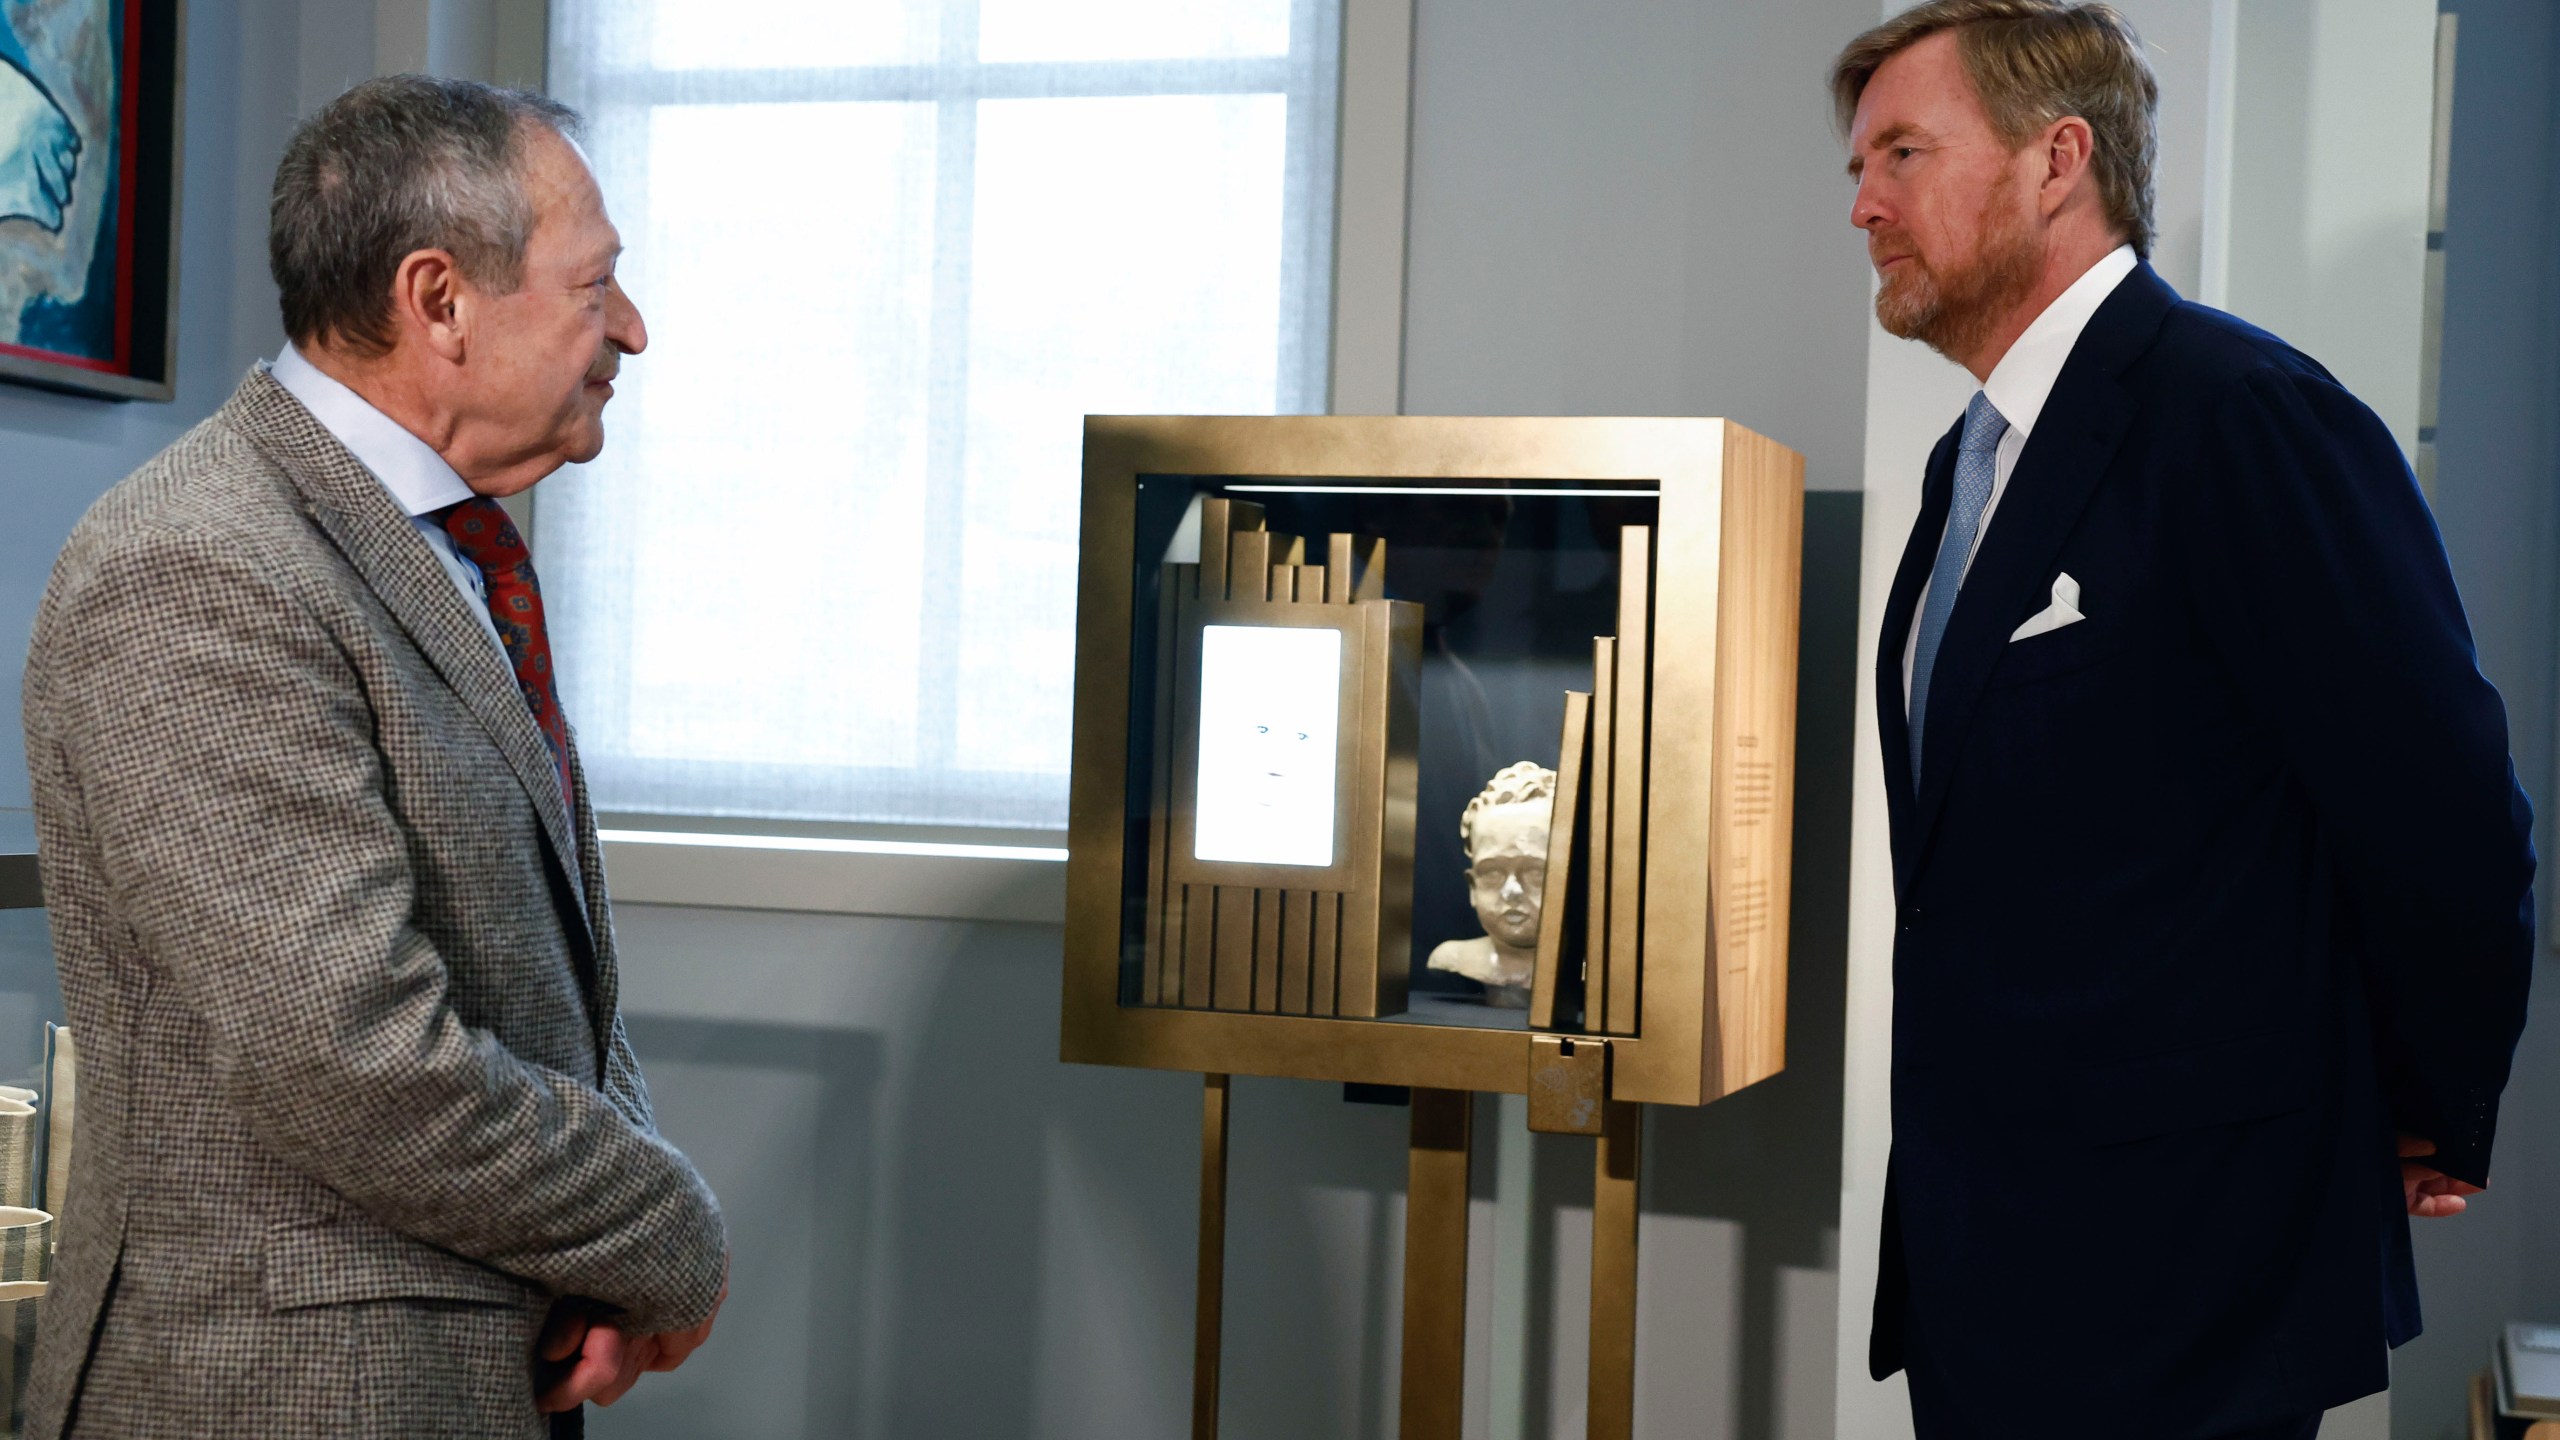 Netherlands' King Willem Alexander, right, tours the National Holocaust Museum in Amsterdam, Netherlands, Sunday, March 10, 2024. The Netherlands's National Holocaust Museum is opening on Sunday in a ceremony presided over by the Dutch king as well as Israeli President Isaac Herzog, whose presence is prompting protest because of Israel's deadly offensive against Palestinians in Gaza. (Piroschka van de Wouw/Pool Photo via AP)